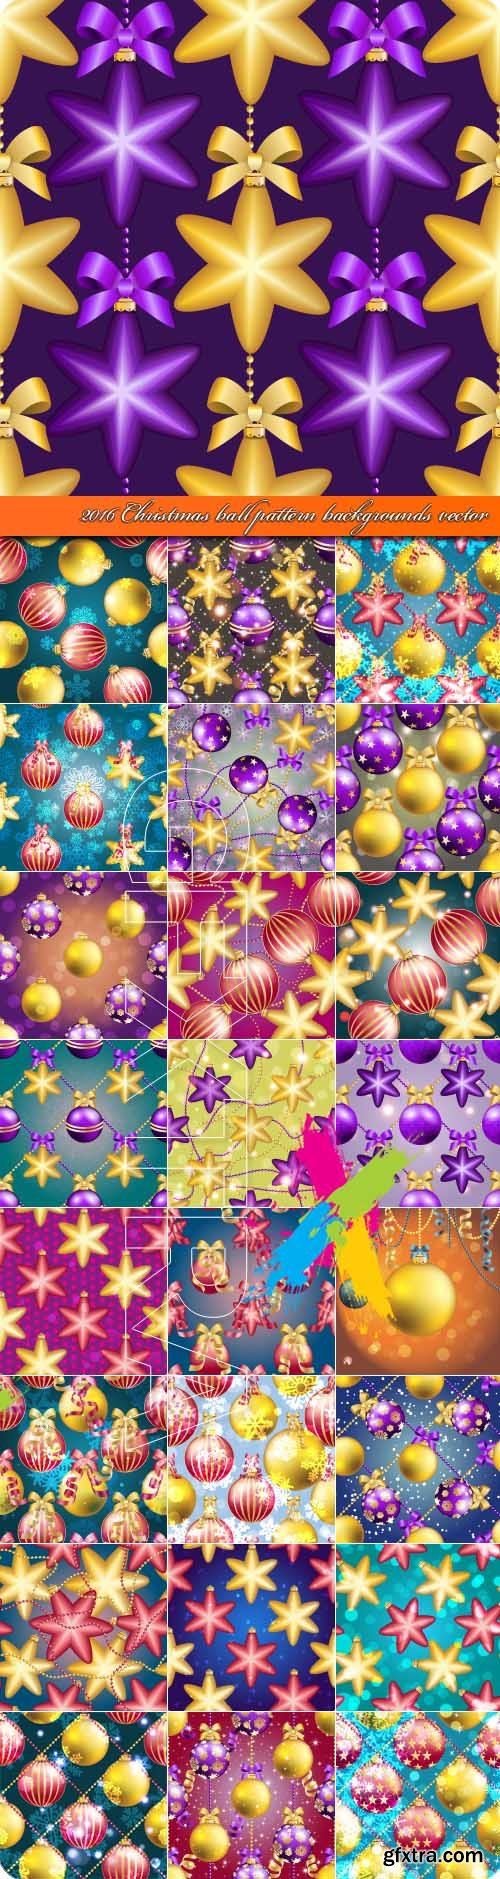 2016 Christmas ball pattern backgrounds vector